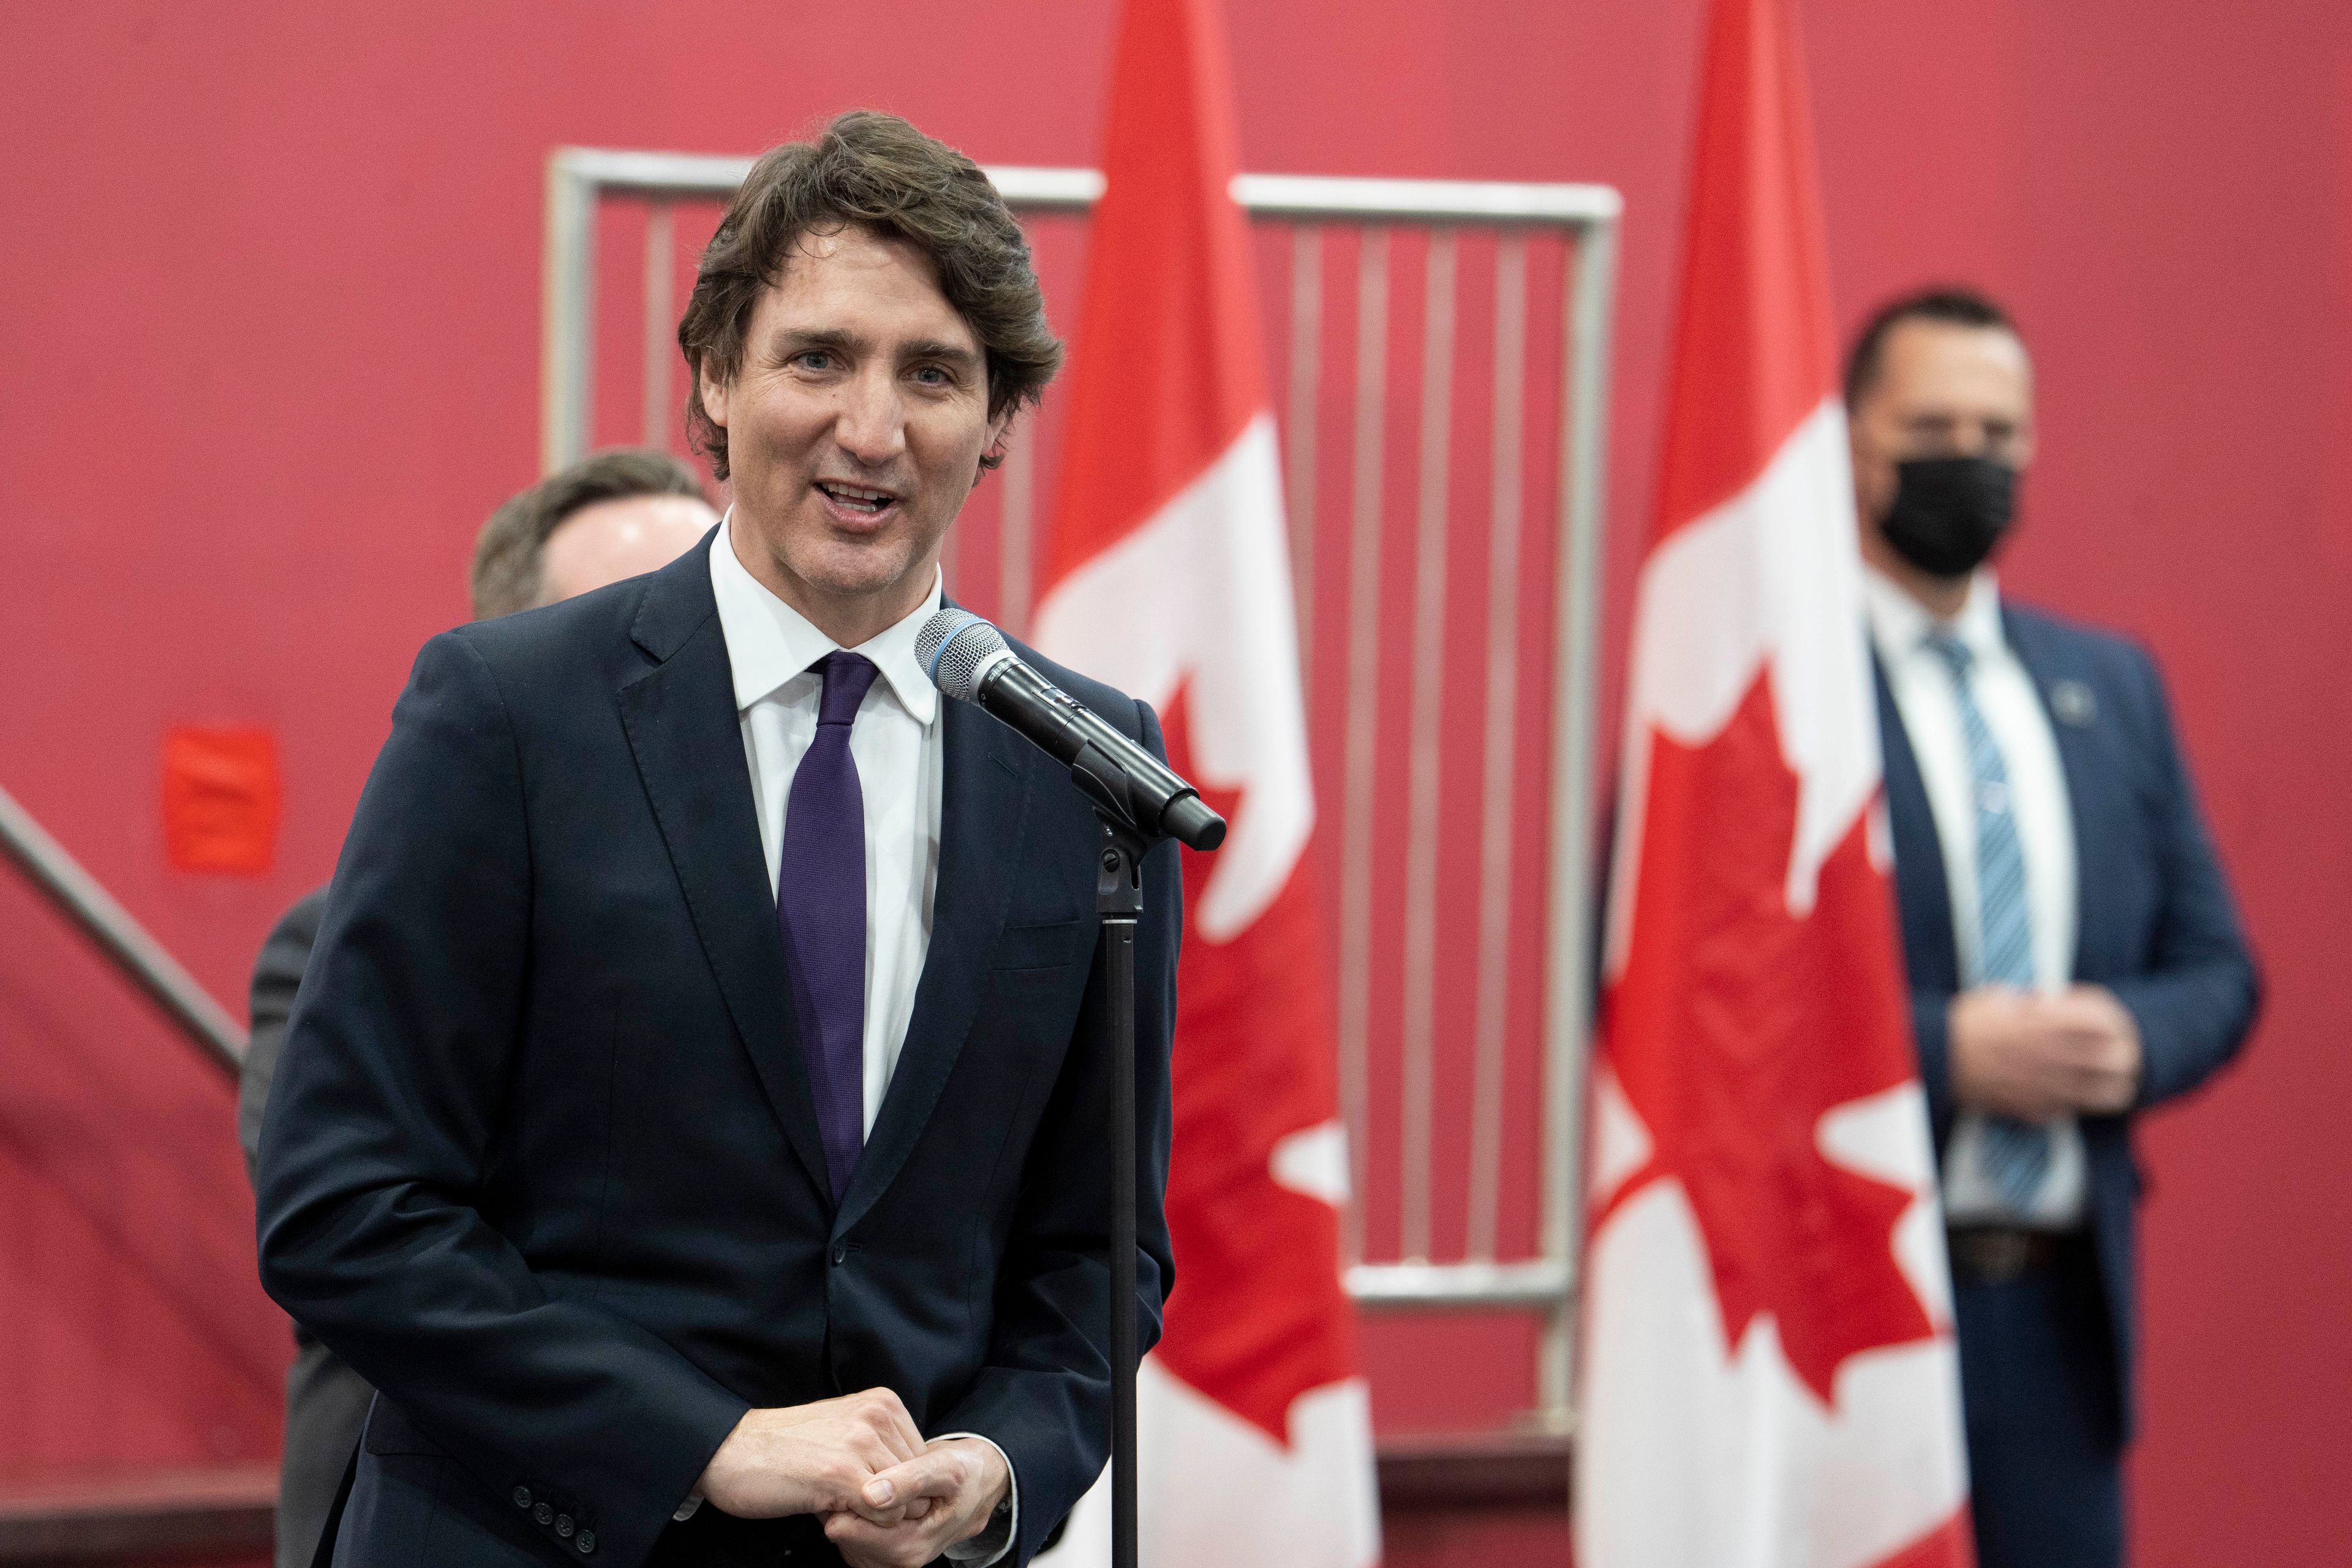 Trudeau addresses a gathering of students, parents, and staff during a visit to the International School of Cambridge in Cambridge, Ont., April 20, 2022. (Peter Power/The Canadian Press)